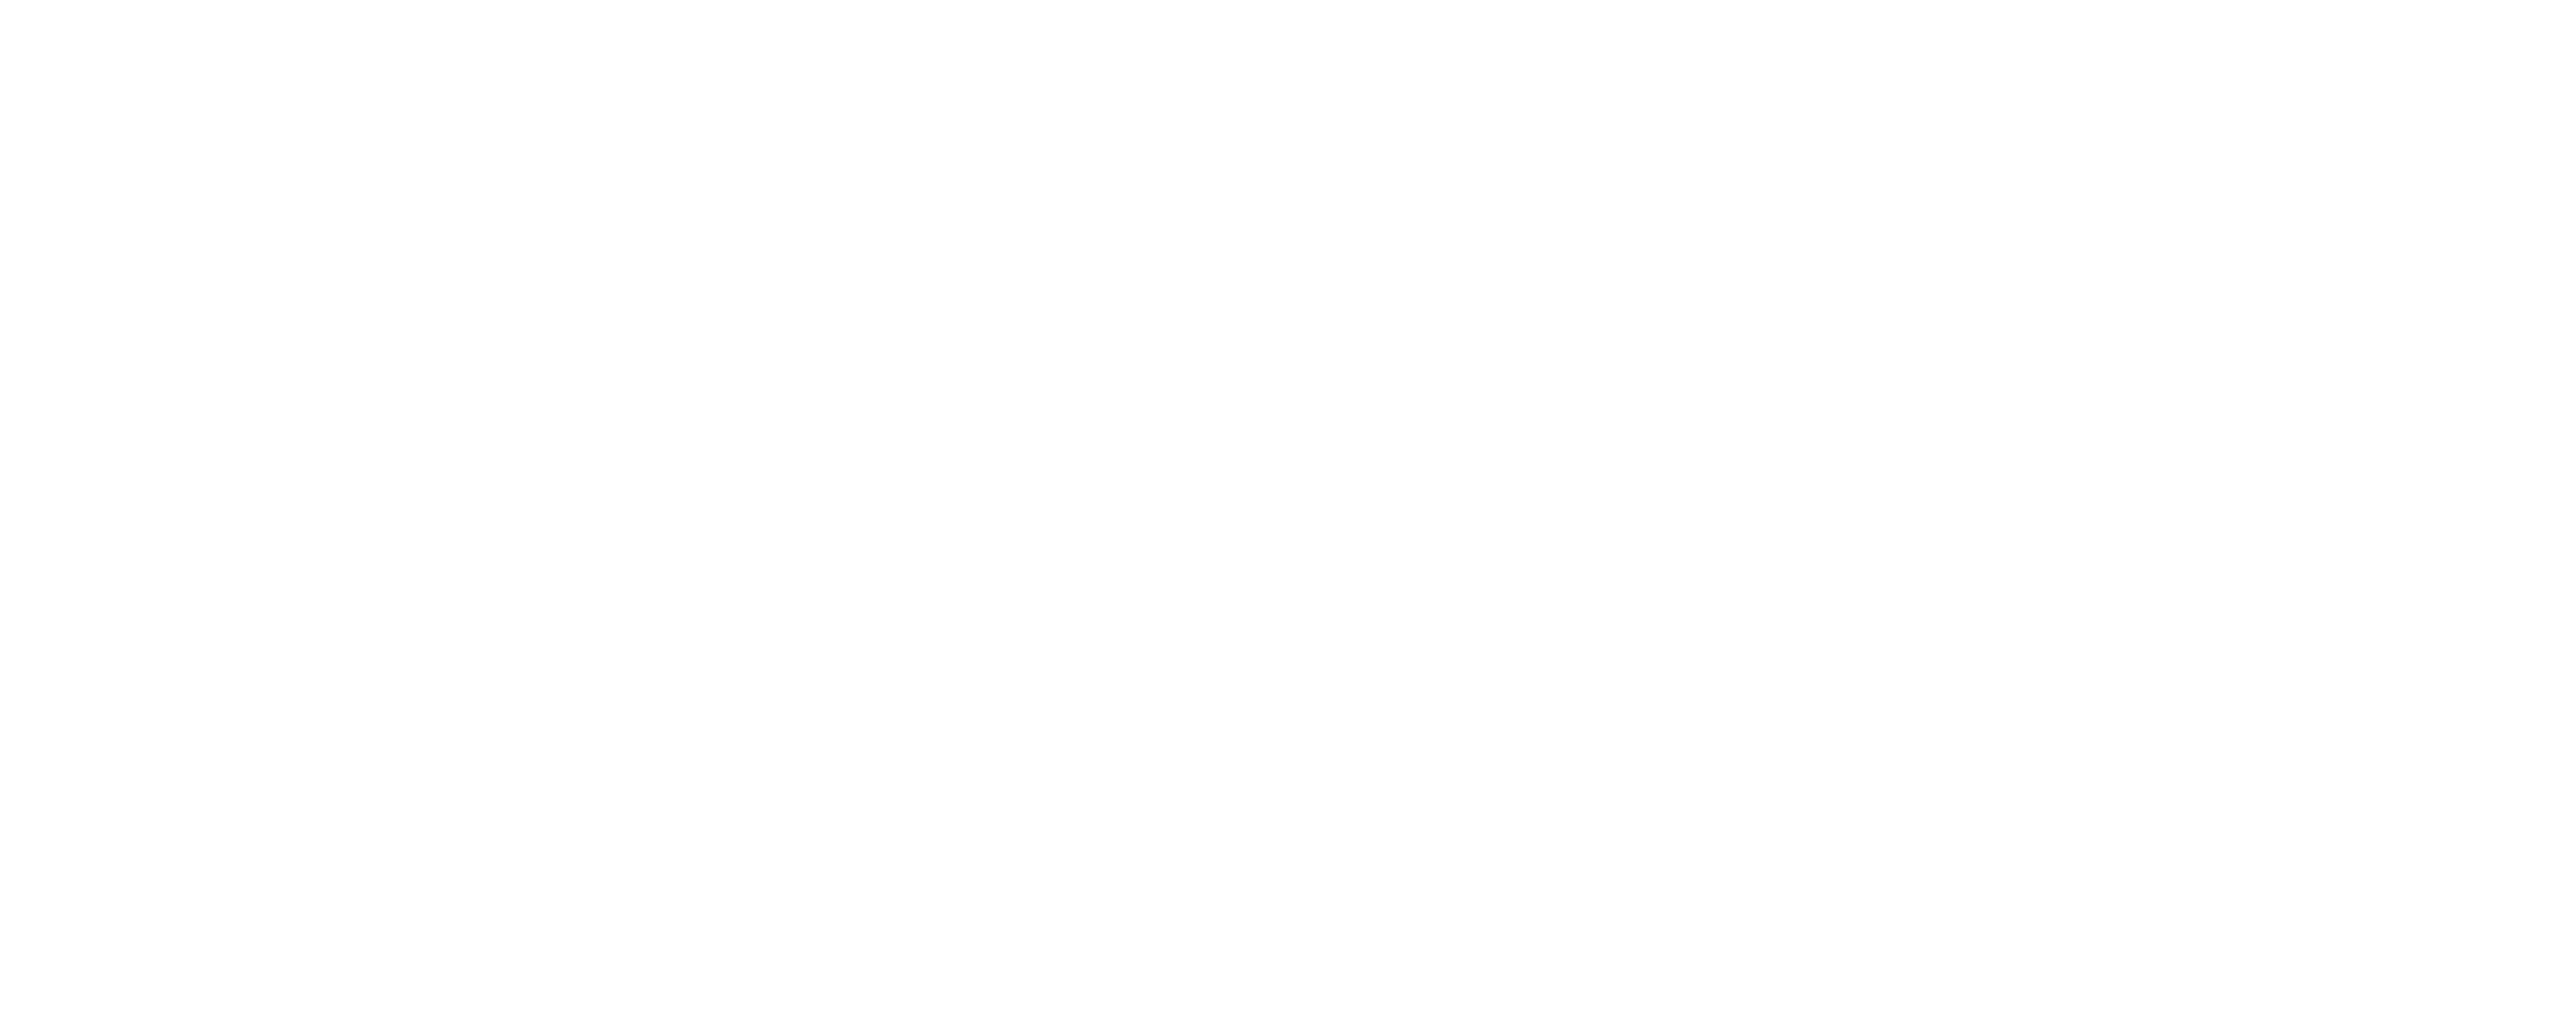 ControlTower_logo-neg.png